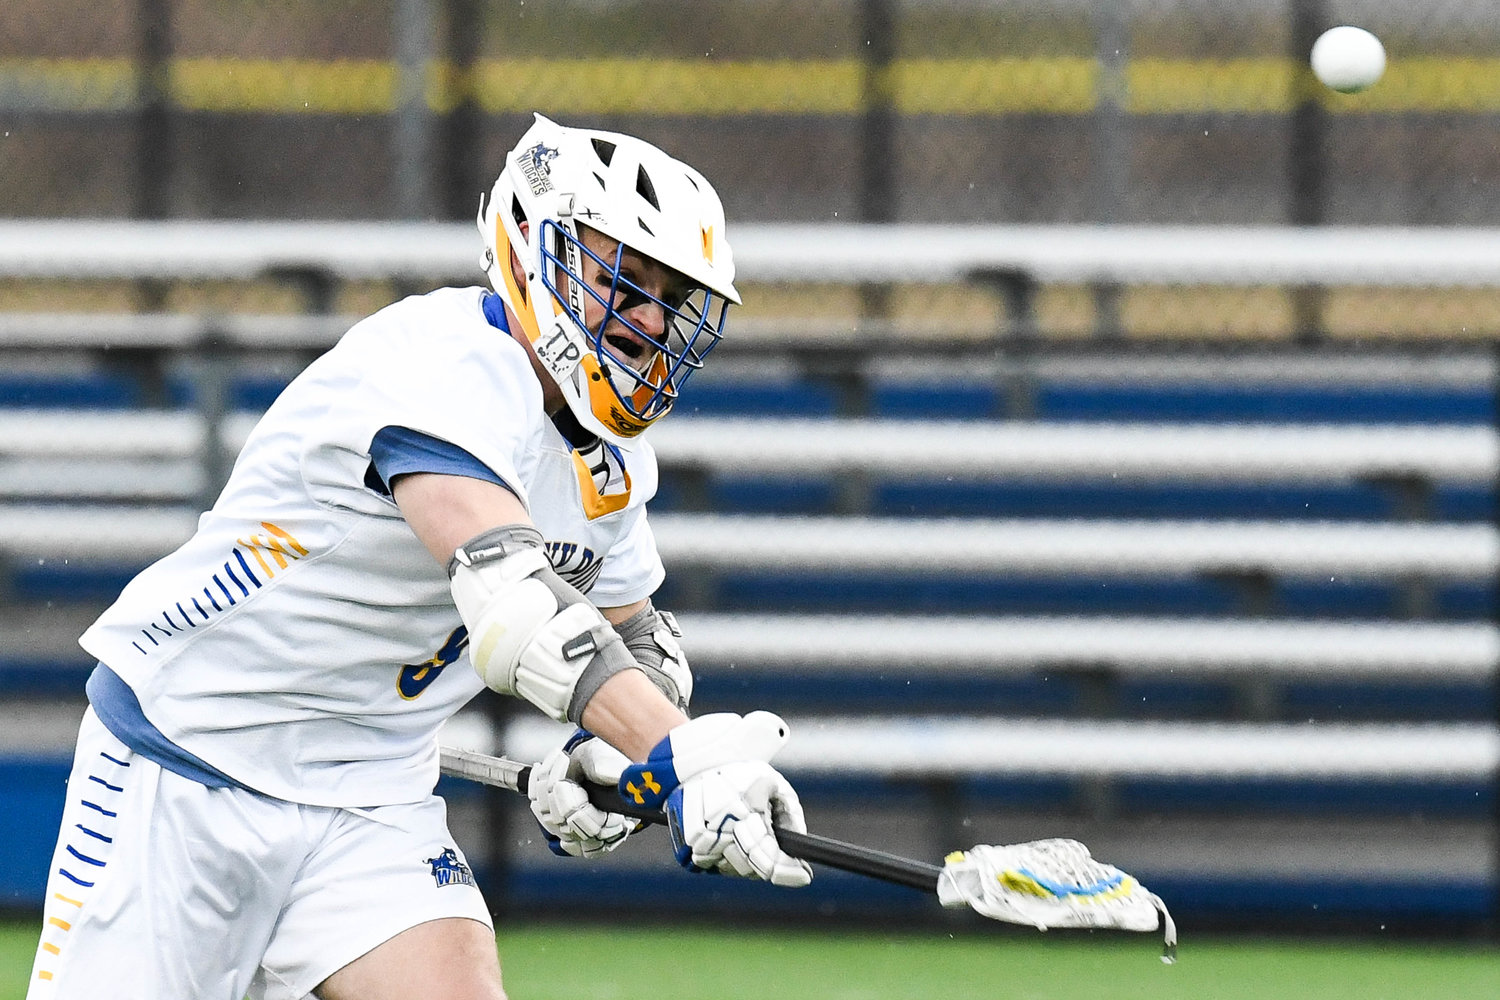 LET IT RIP — SUNY Poly player Steven Sullivan fires the ball toward the net during the lacrosse game against Northern Vermont-Lyndon on Friday at home. Sullivan had an assist in the team’s 20-2 NAC league win.